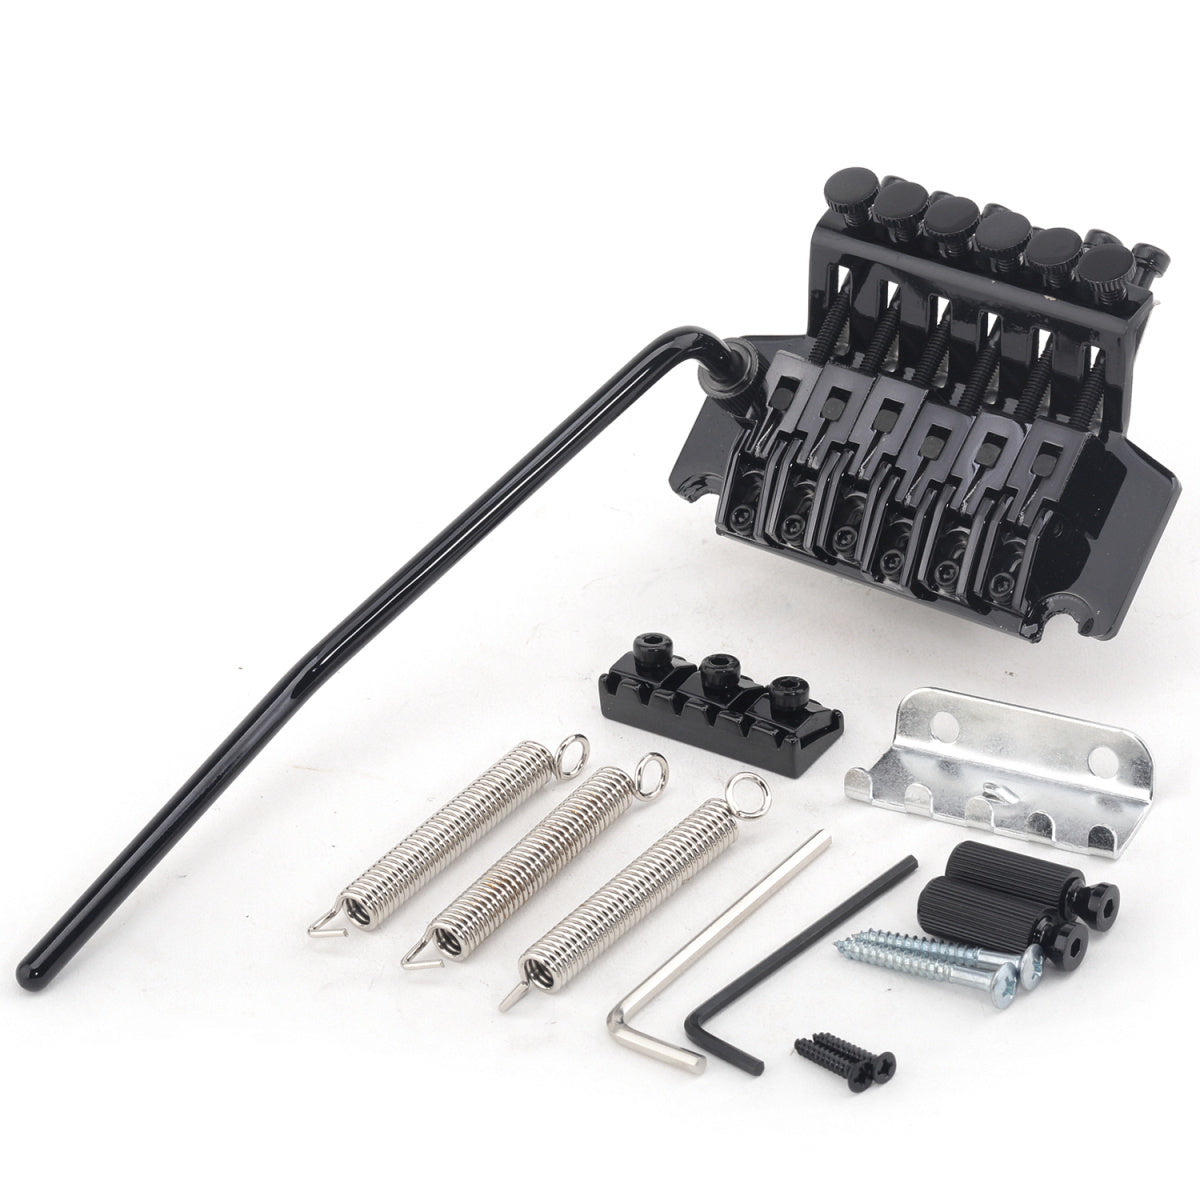 Musiclily Pro 54mm Guitar Double Locking Tremolo Bridge Assembly Set for Electric Guitar , Black